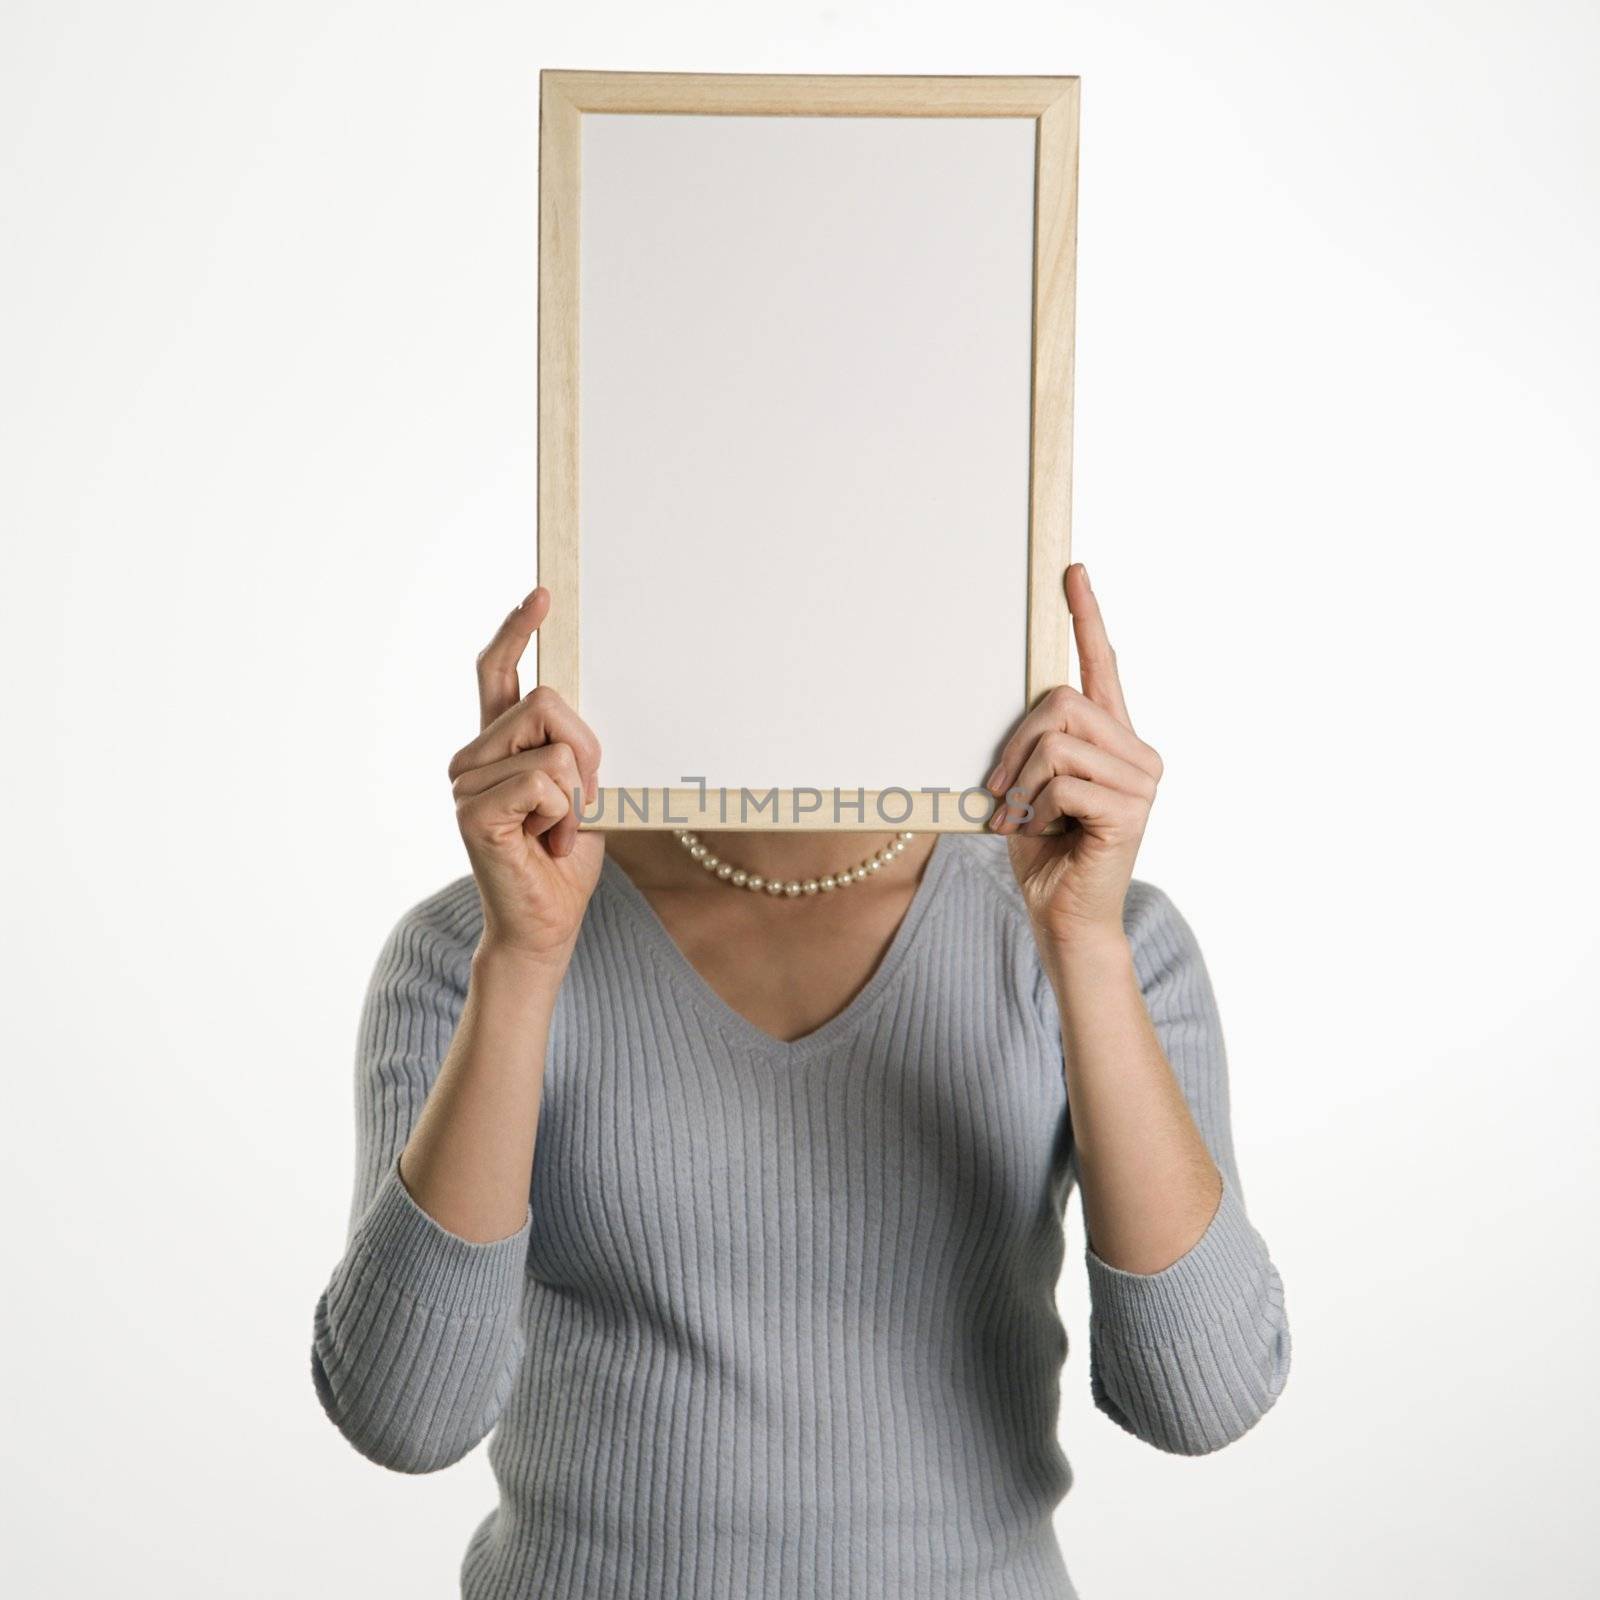 Caucasian mid adult professional business woman holding up blank dry erase board in front of her face.